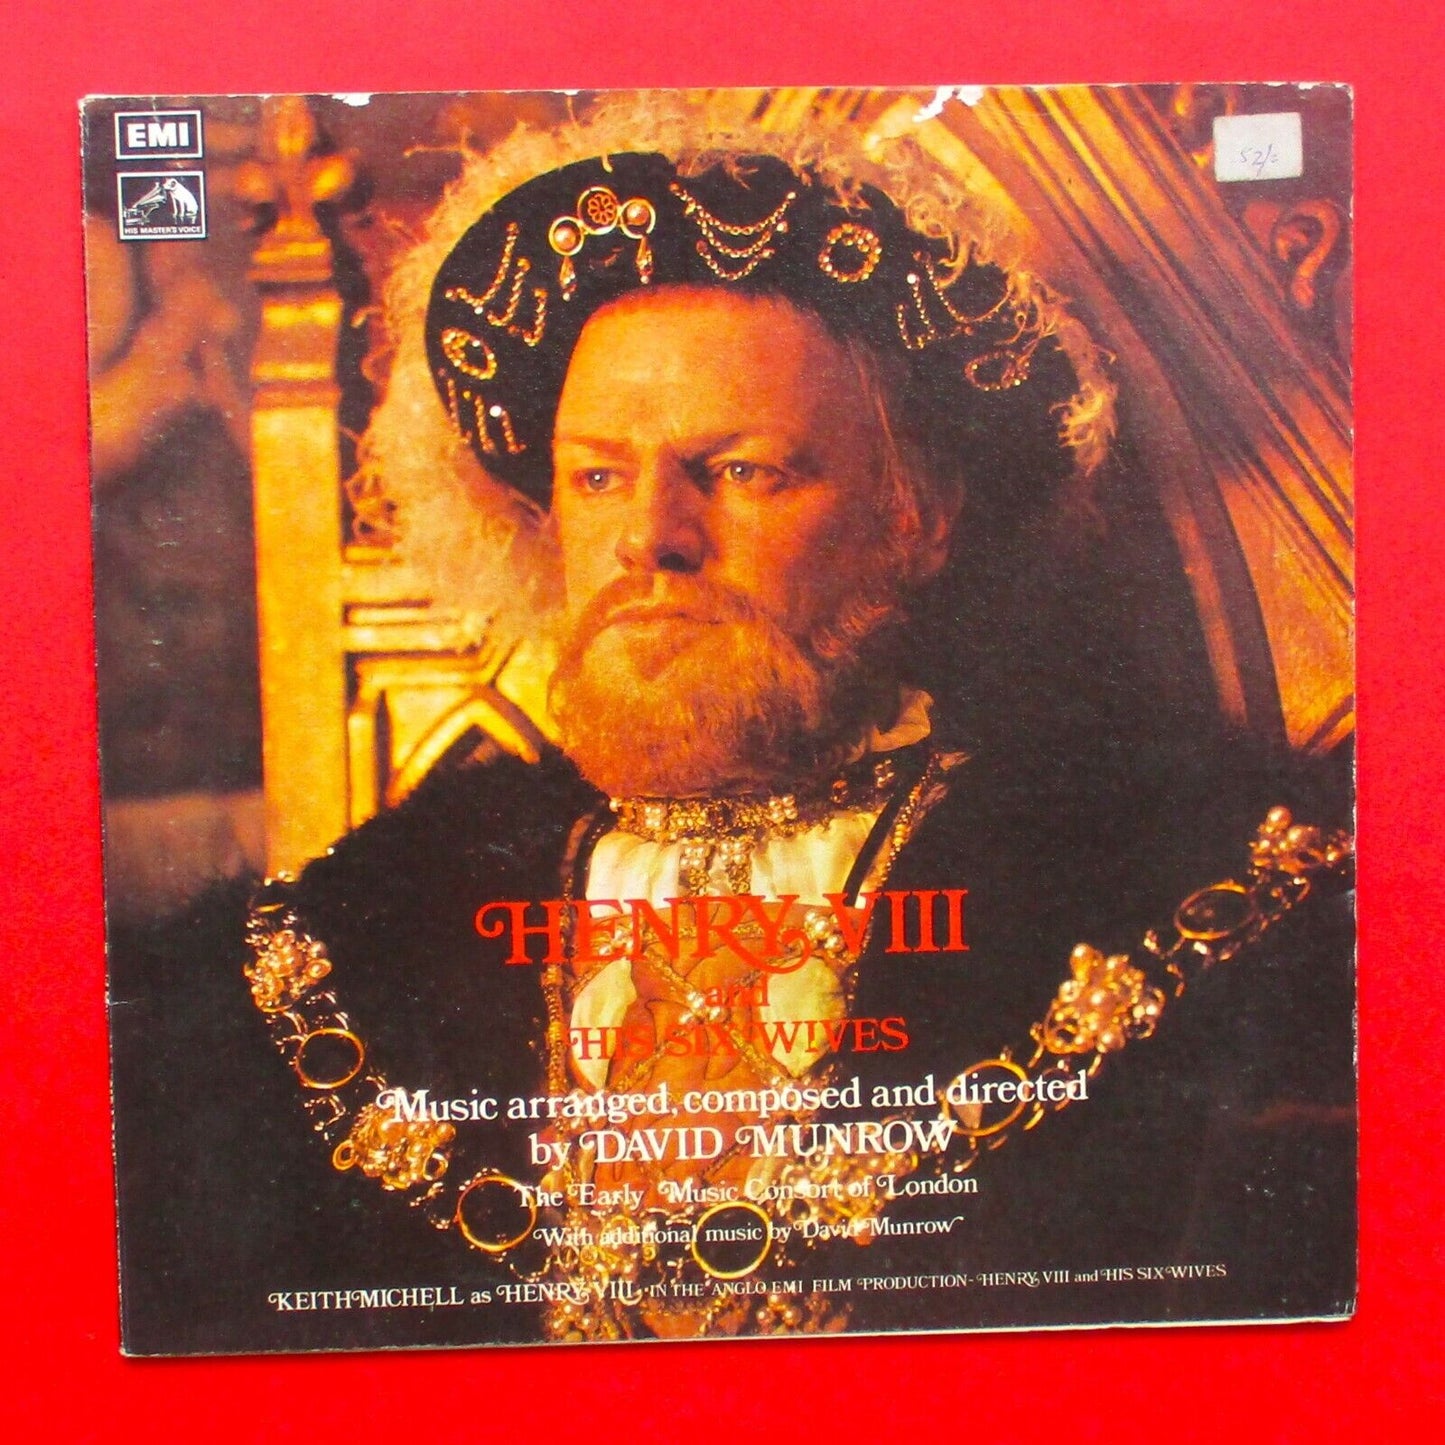 David Munrow & The Early Music Consort Of London ‎Keith Michell In Henry VIII LP